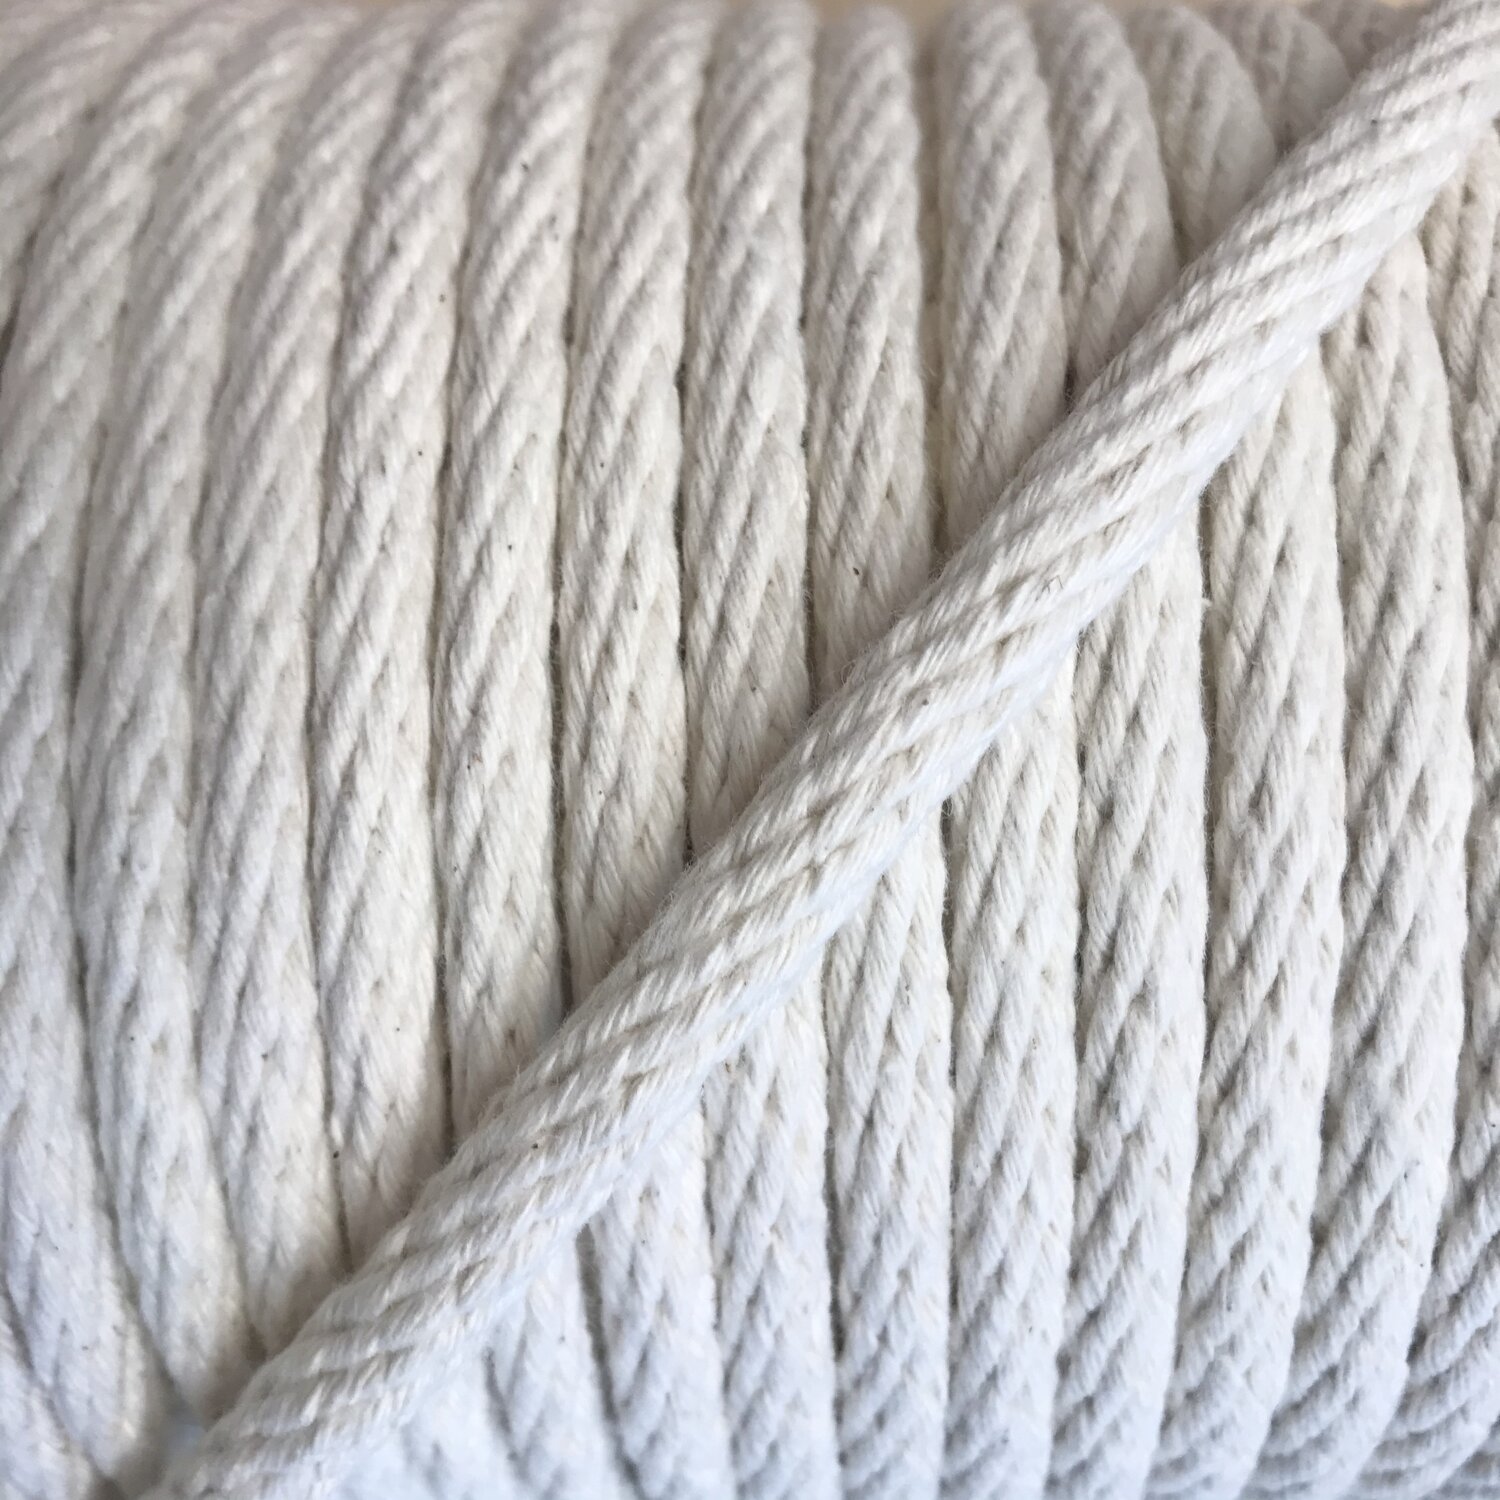 100% Cotton Rope Spool - Made in America - 5/16 Solid Braid Rope